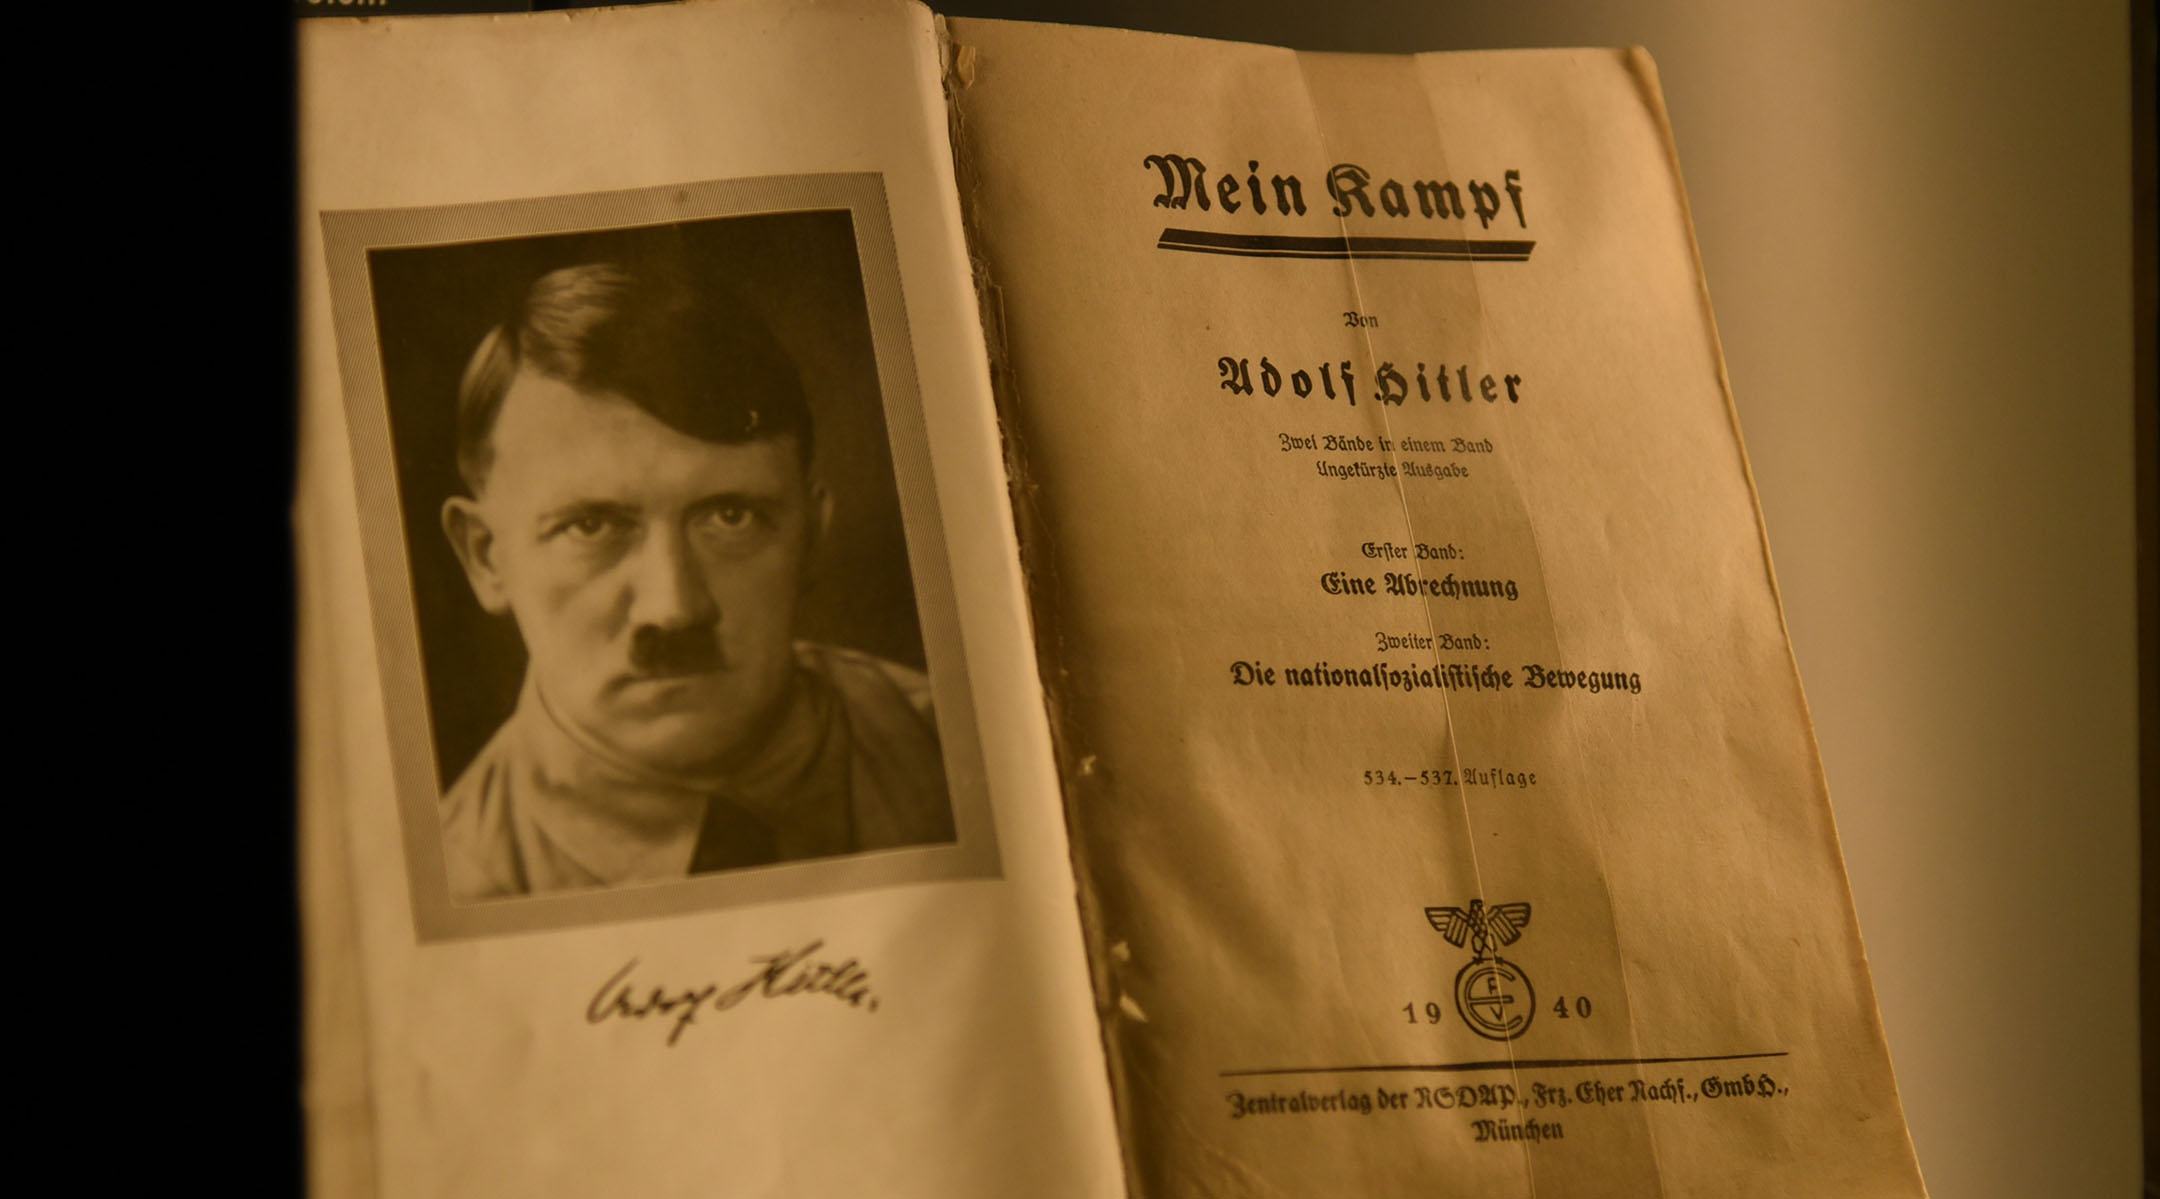 German scholars make their best-selling annotated version of Hitler’s ‘Mein Kampf’ available online for free